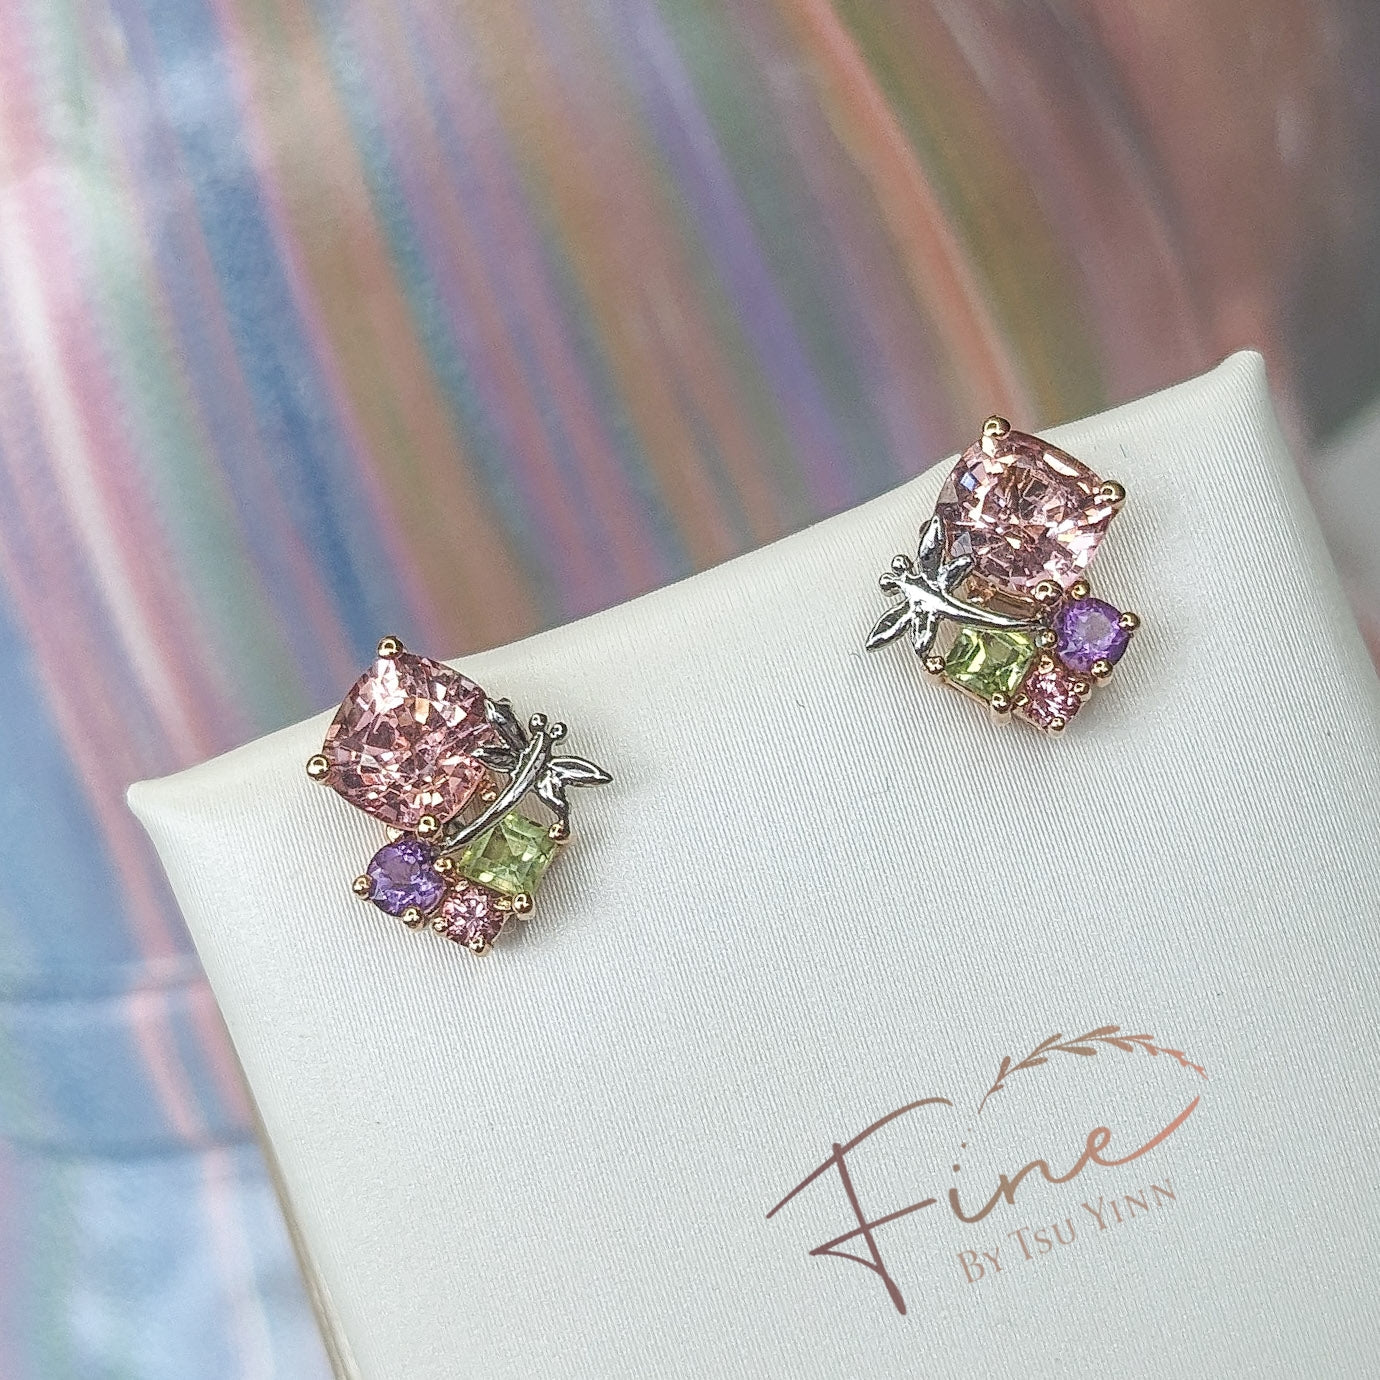 FBTY Petite Studs:  Peach Pink Spinels with Peridot, Spinels, Amethyst and our signature dragonfly